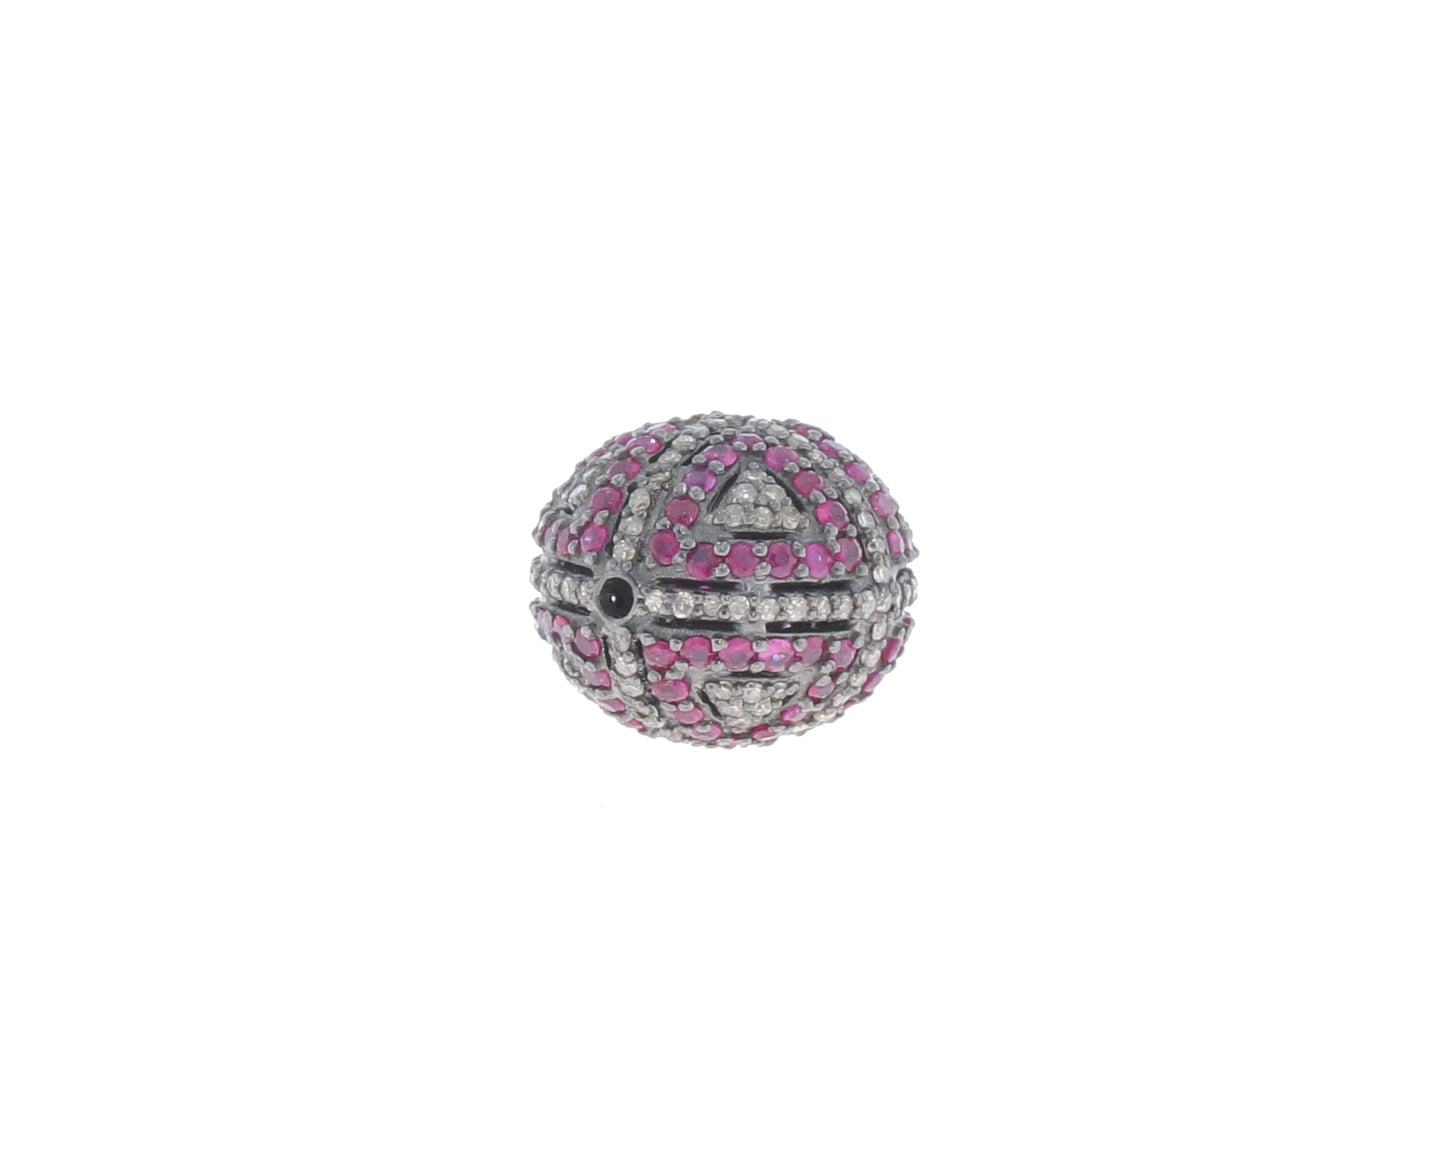 Oval Designer Silver Pave Diamond and Ruby Beads